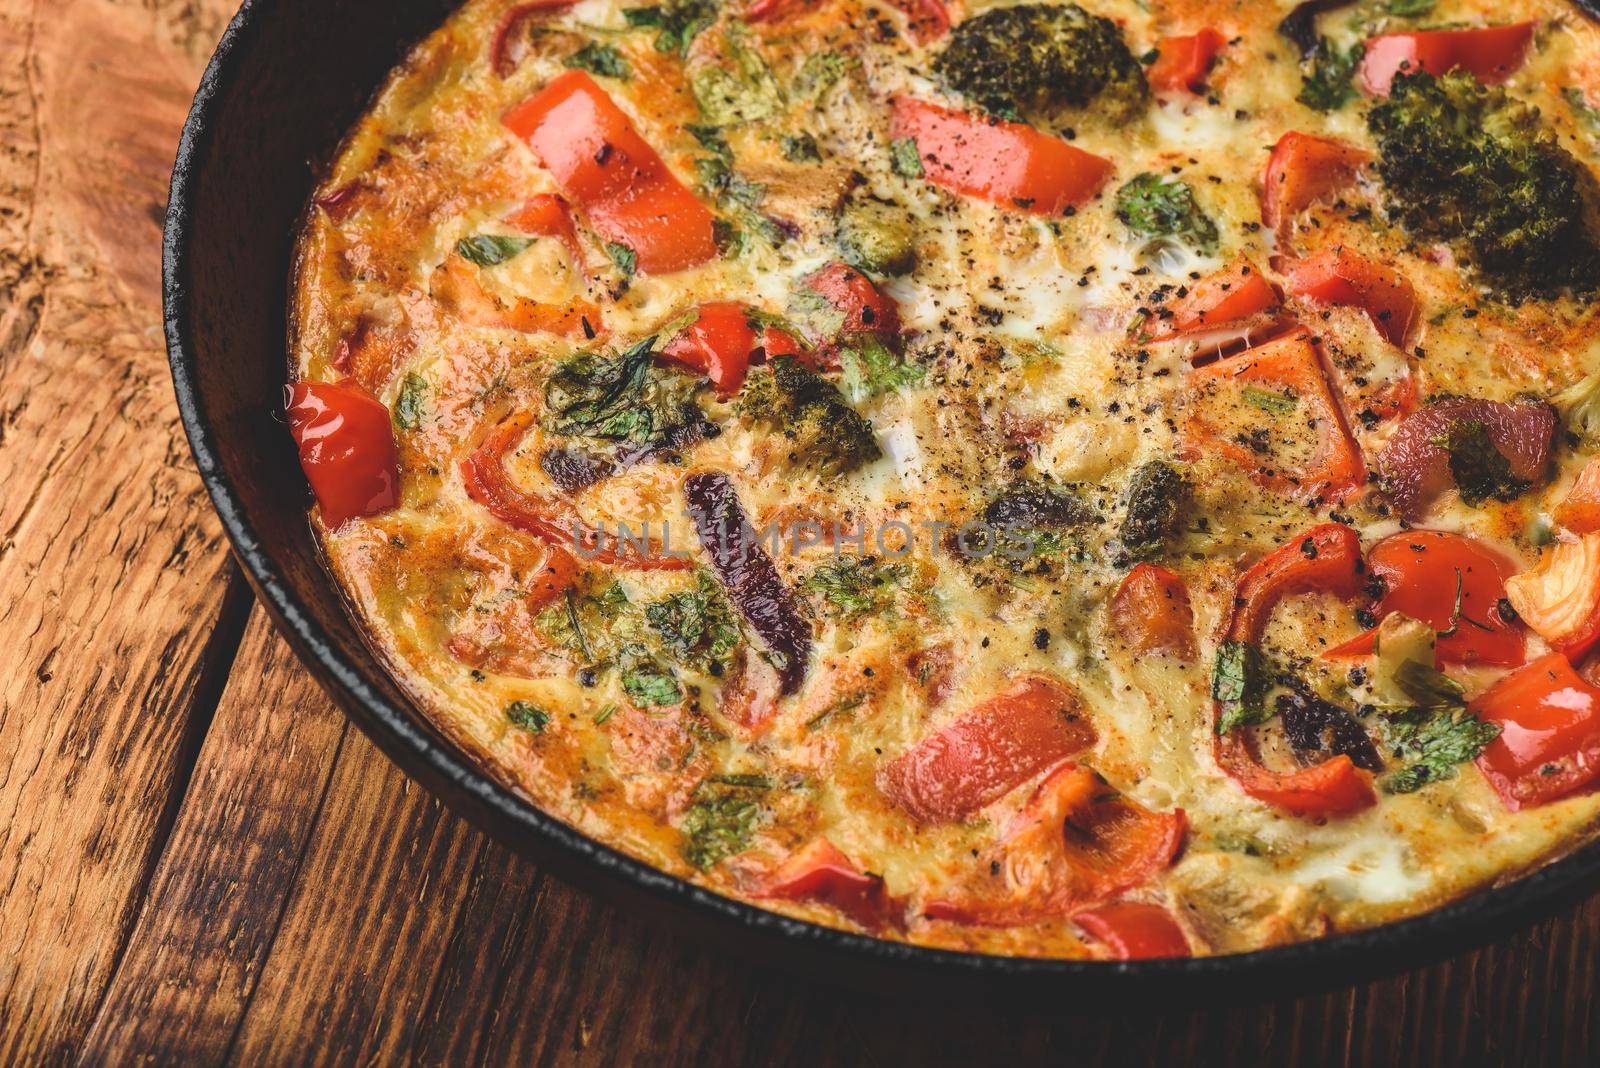 Vegetable frittata with broccoli, red bell pepper and red onion in cast iron pan